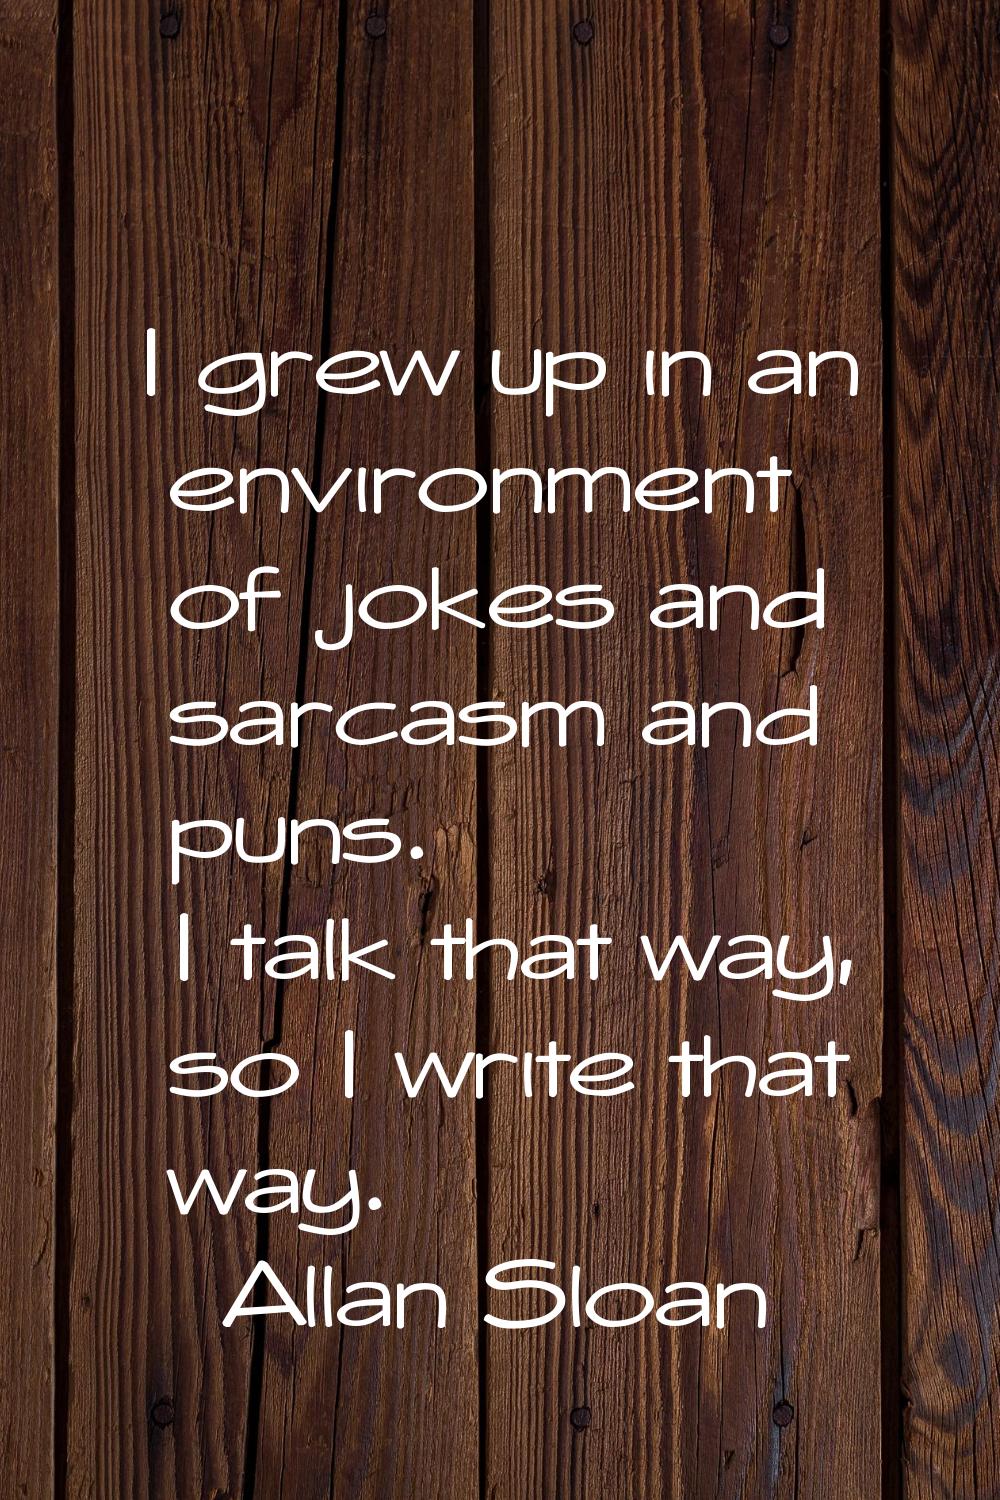 I grew up in an environment of jokes and sarcasm and puns. I talk that way, so I write that way.